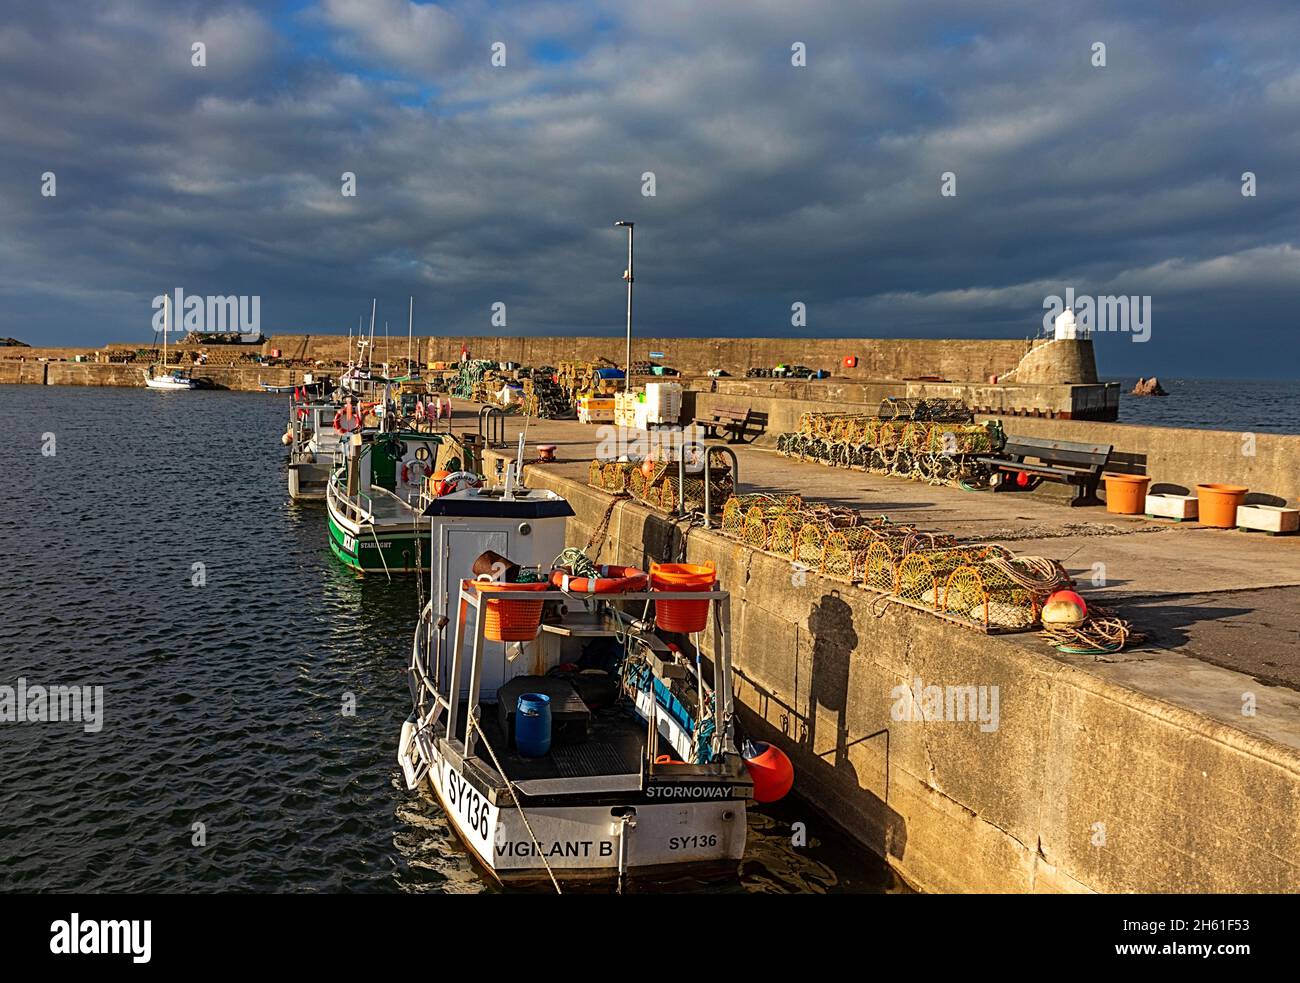 FINDOCHTY VILLAGE MORAY COAST SCOTLAND FISHING GEAR AND BOATS MOORED ALONGSIDE THE HARBOUR WALLS Stock Photo